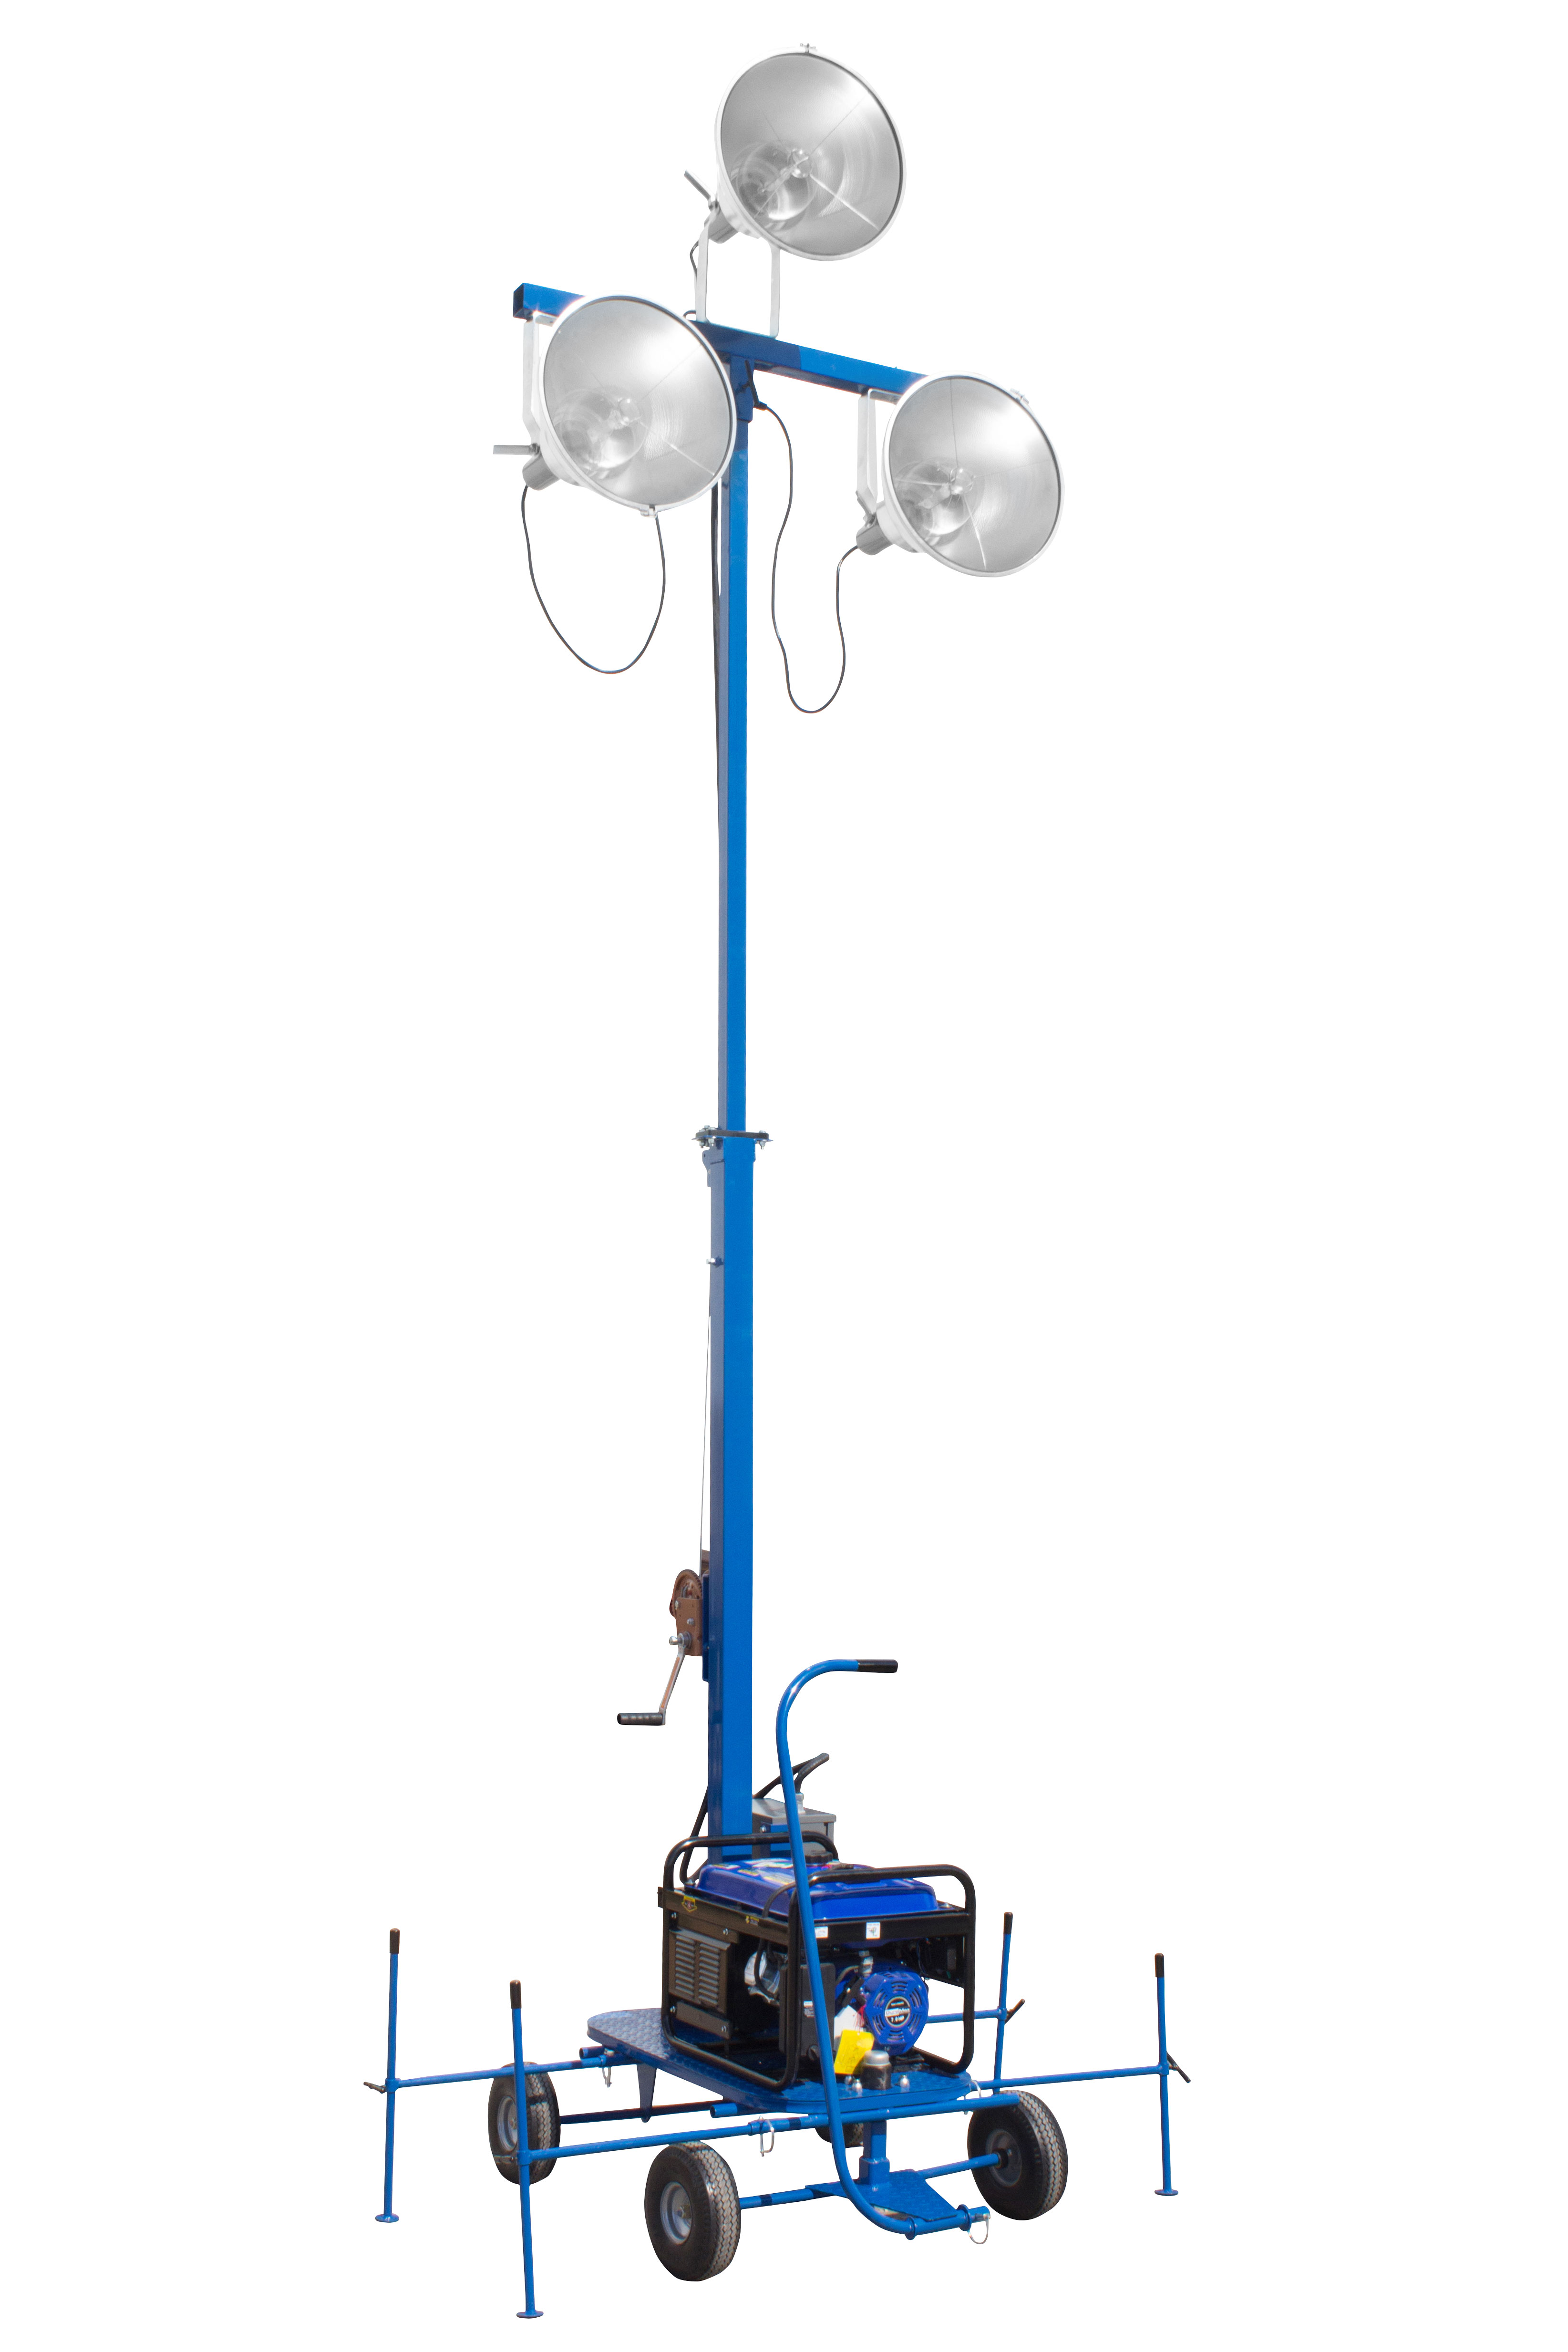 7' to 12' Adjustable Mini Light Tower Equipped with Three 1000 Watt Metal Halide Lamps